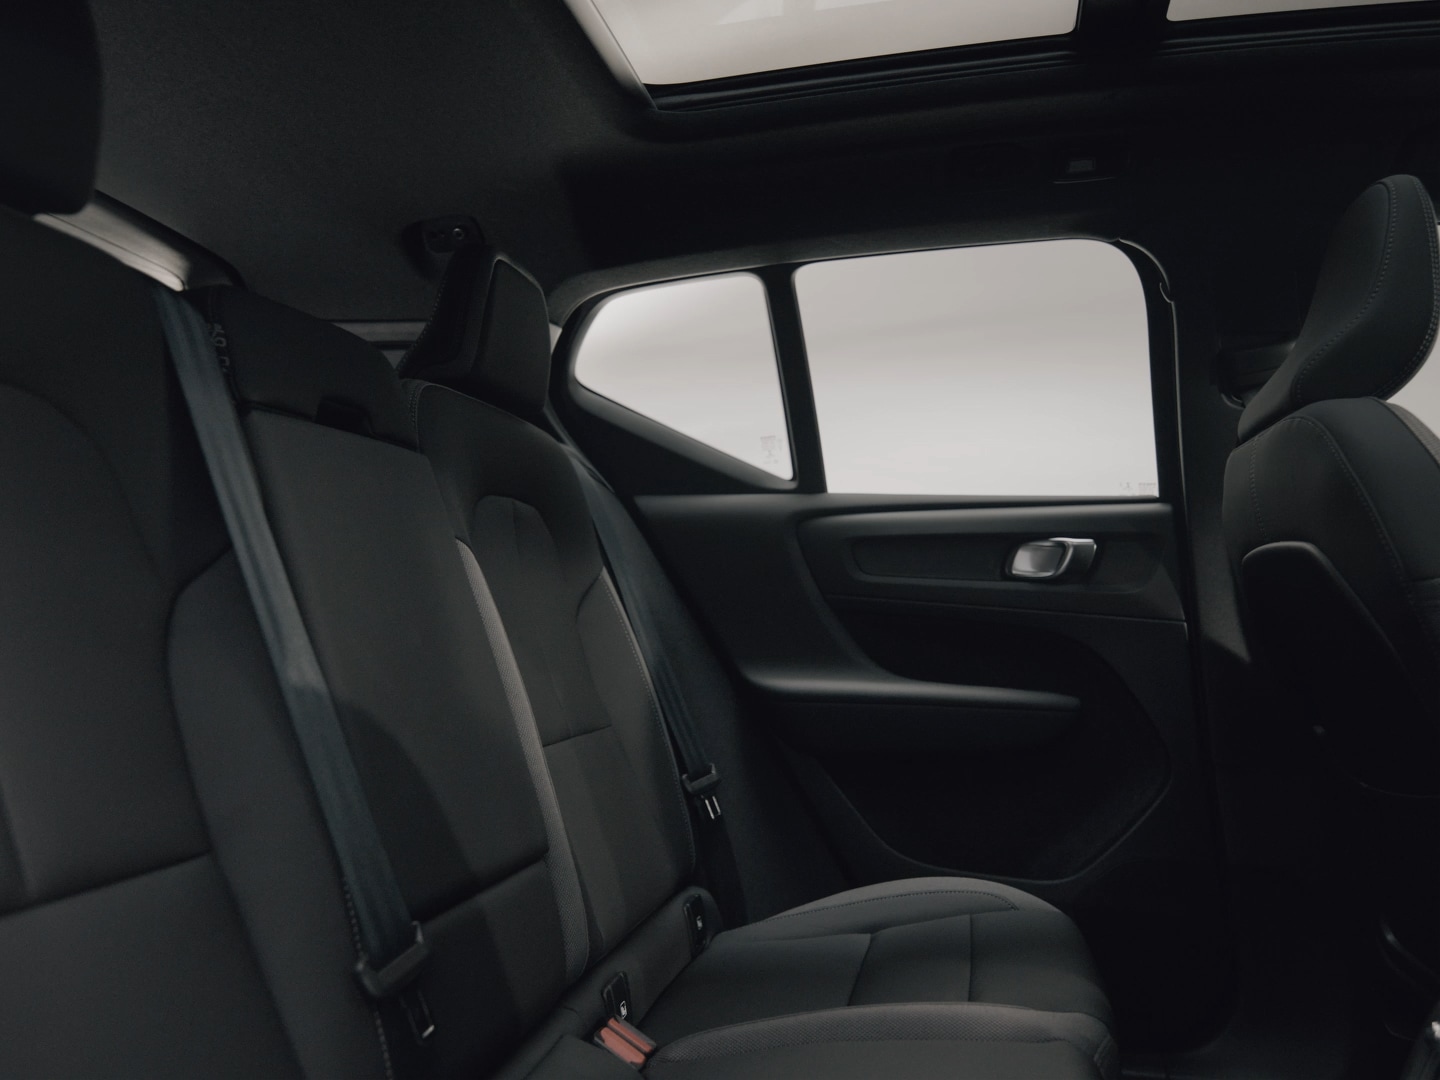 The spacious and stylish interior of the fully electric Volvo EX40.